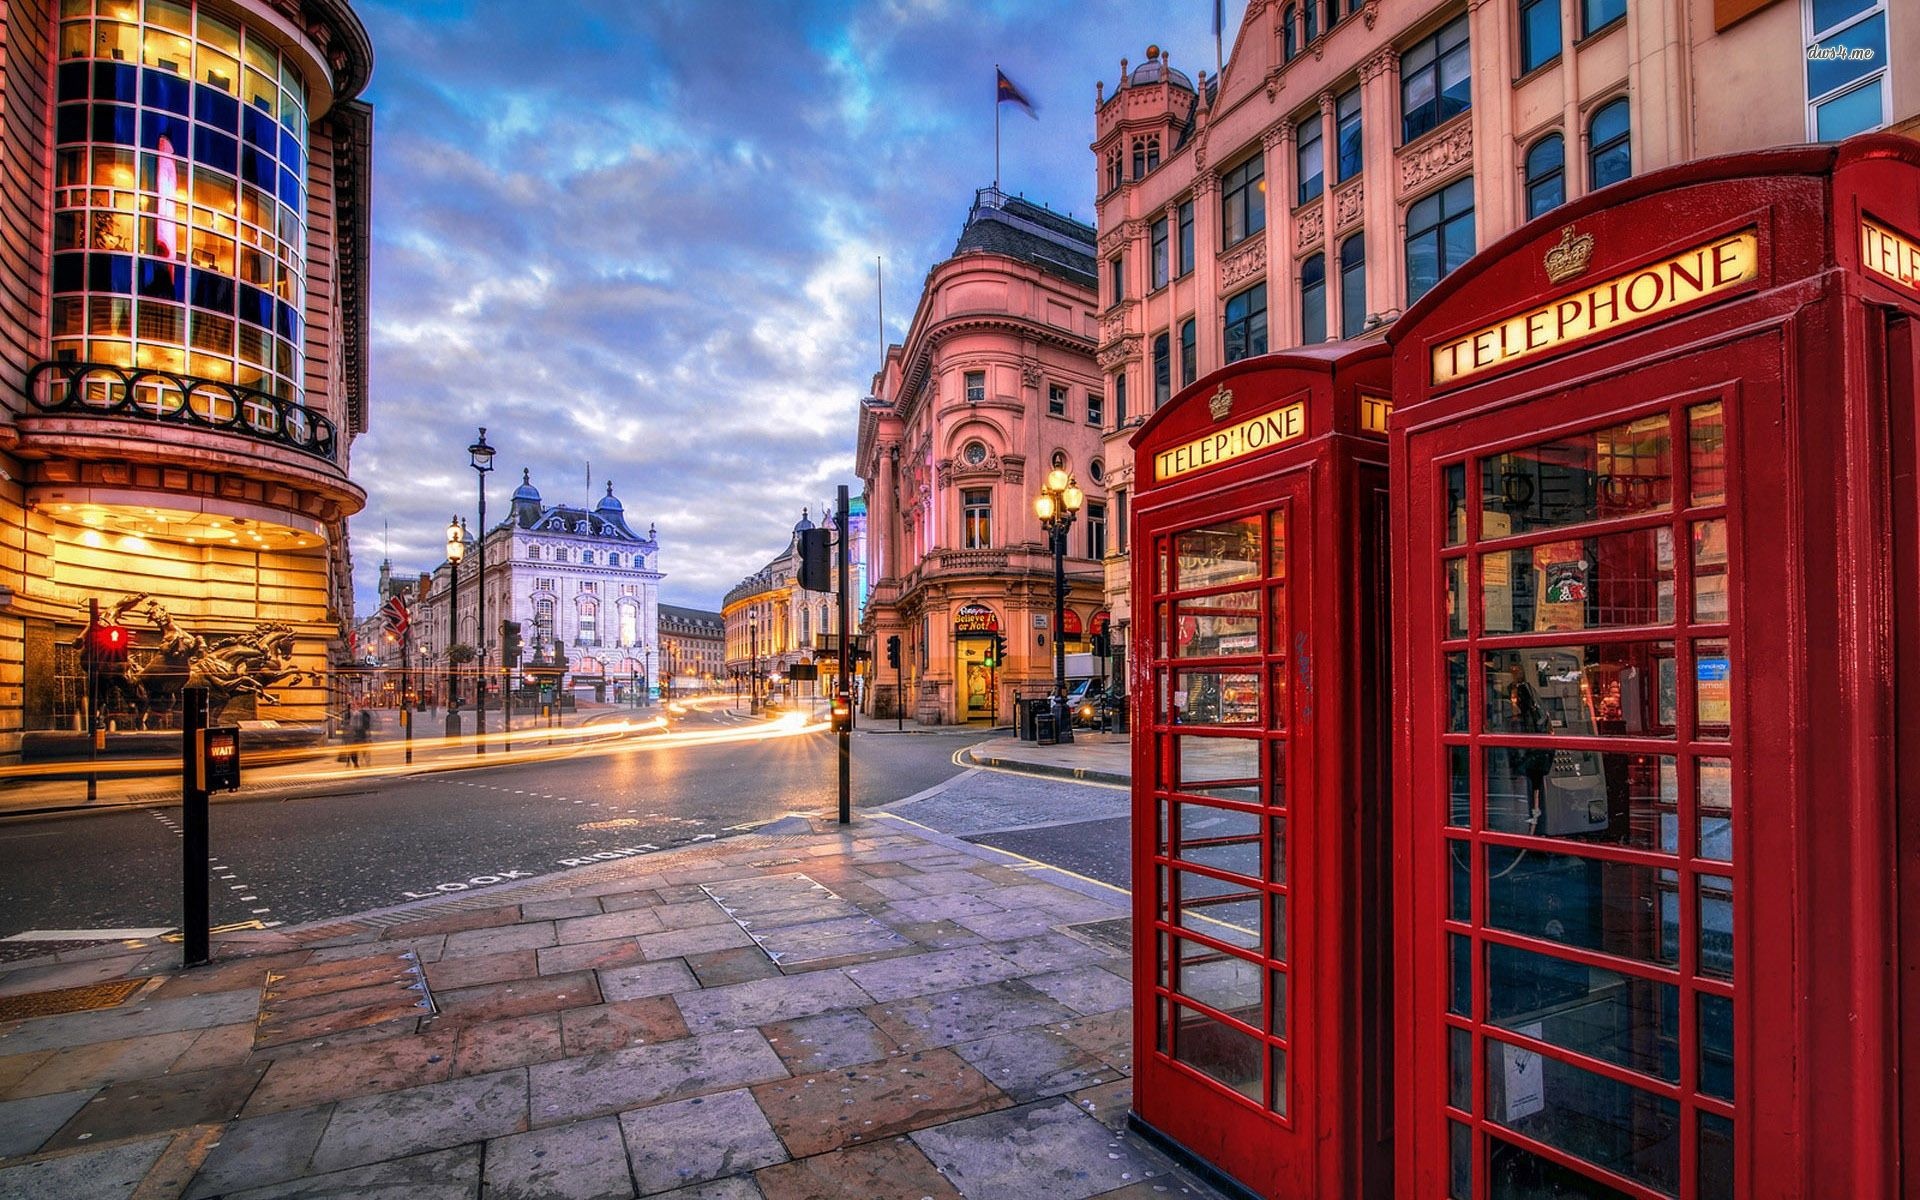 London: The largest city in the UK, Telephone booth. 1920x1200 HD Wallpaper.